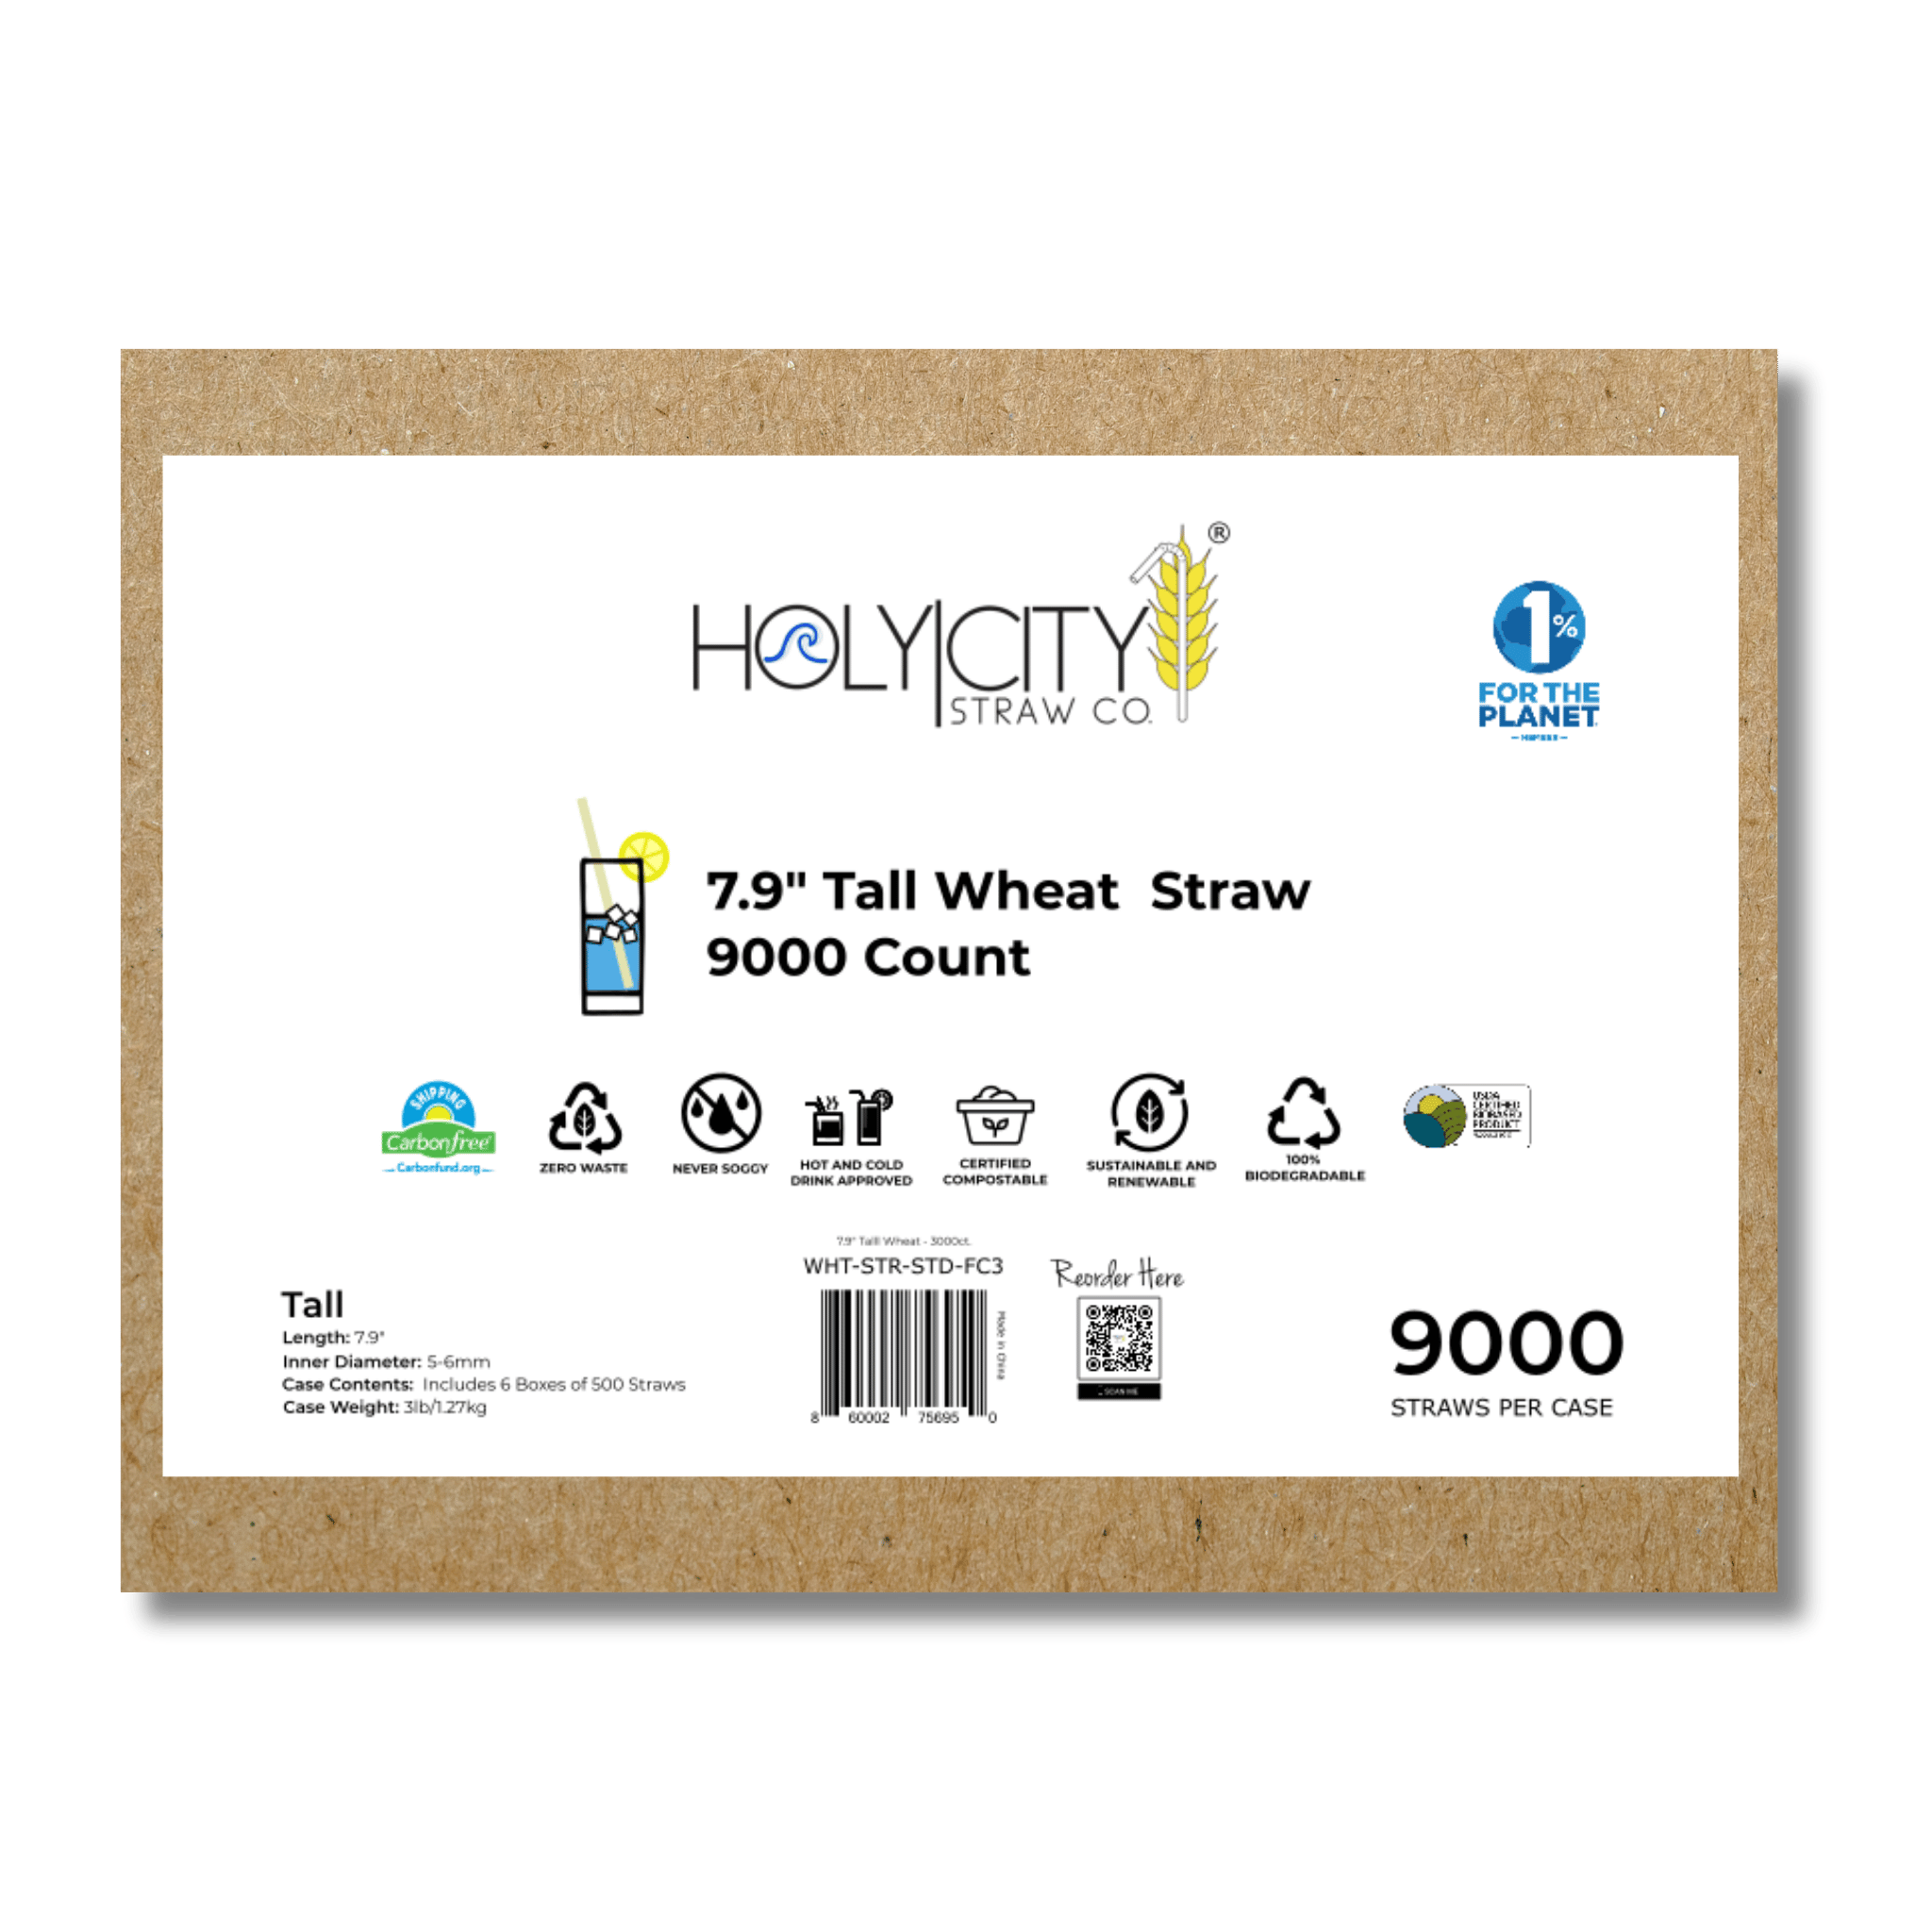 HolyCityStrawCompany 7.9-inch Wheat Tall Straws box of 9000 straws featuring eco-friendly attributes and product specifications.